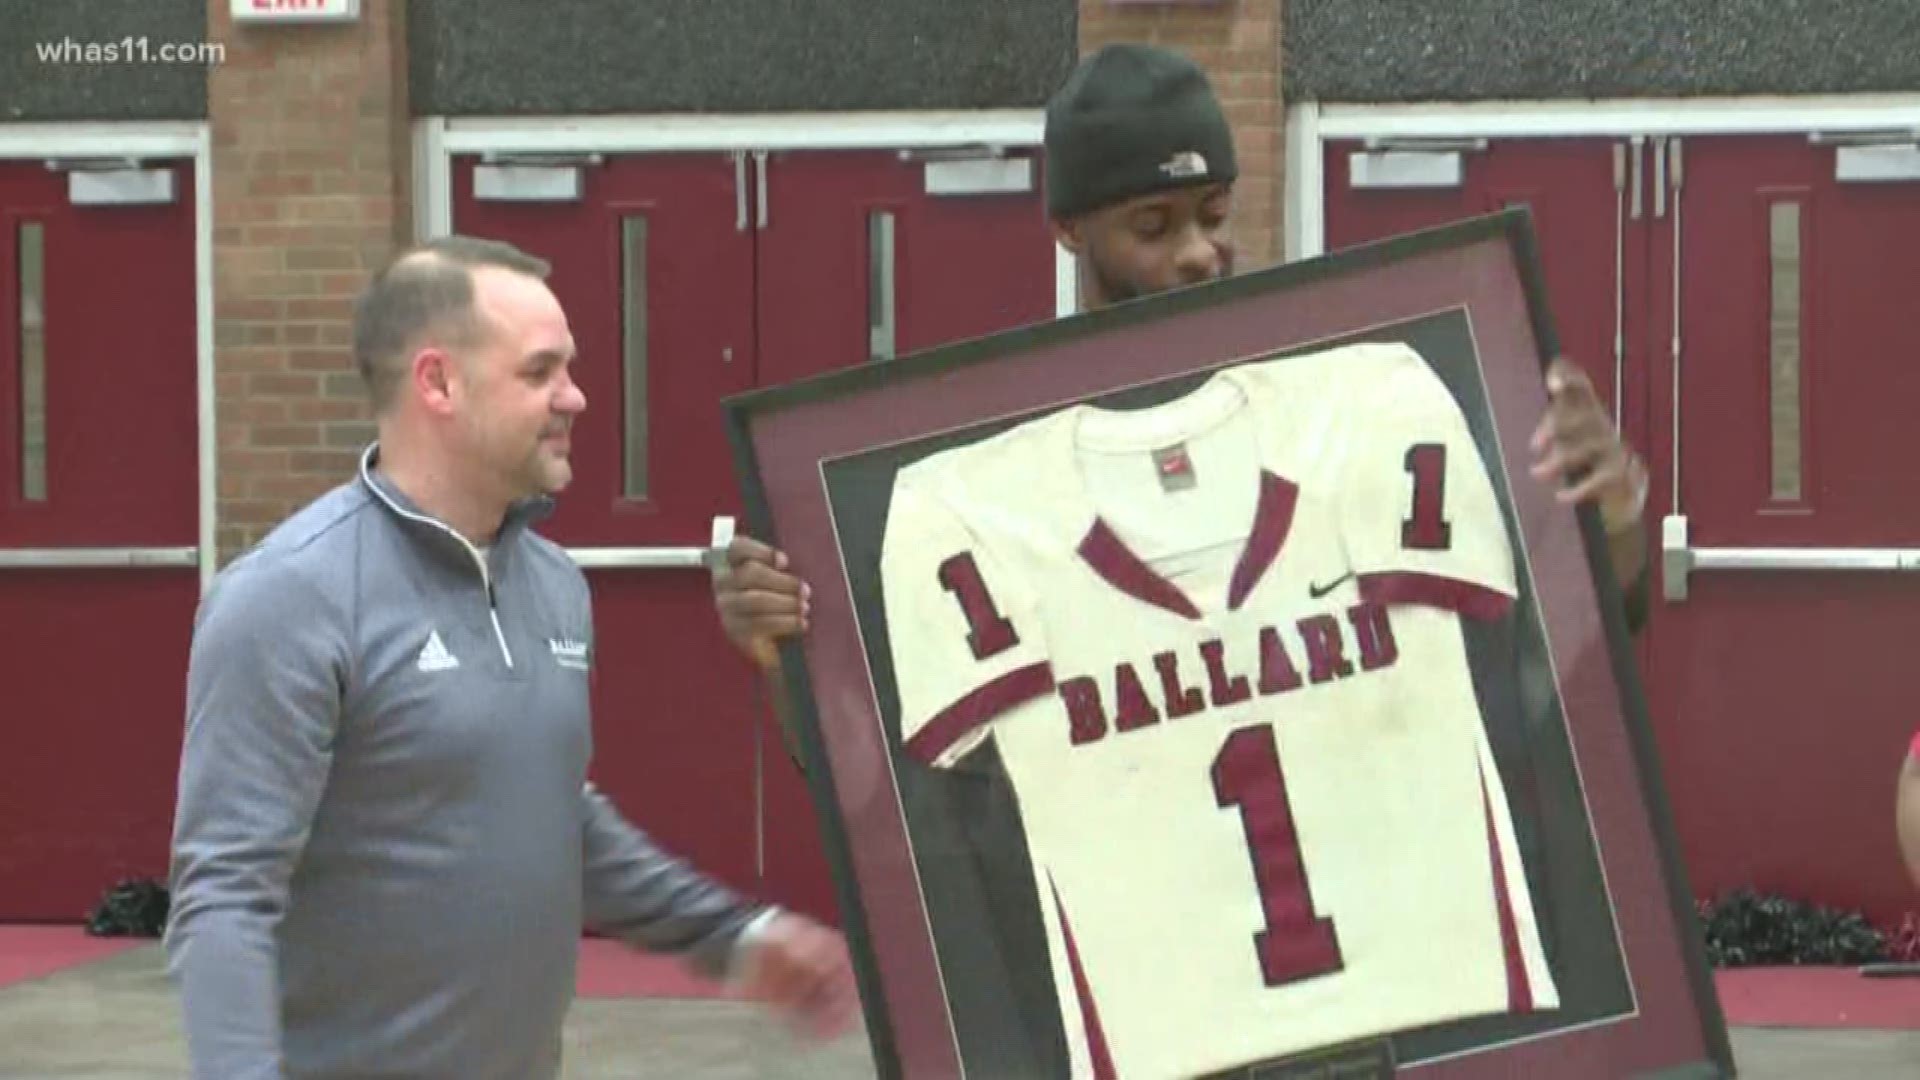 Current Miami Dolphins wide receiver Devante Parker returned to his high school alma mater to have his basketball jersey retired.